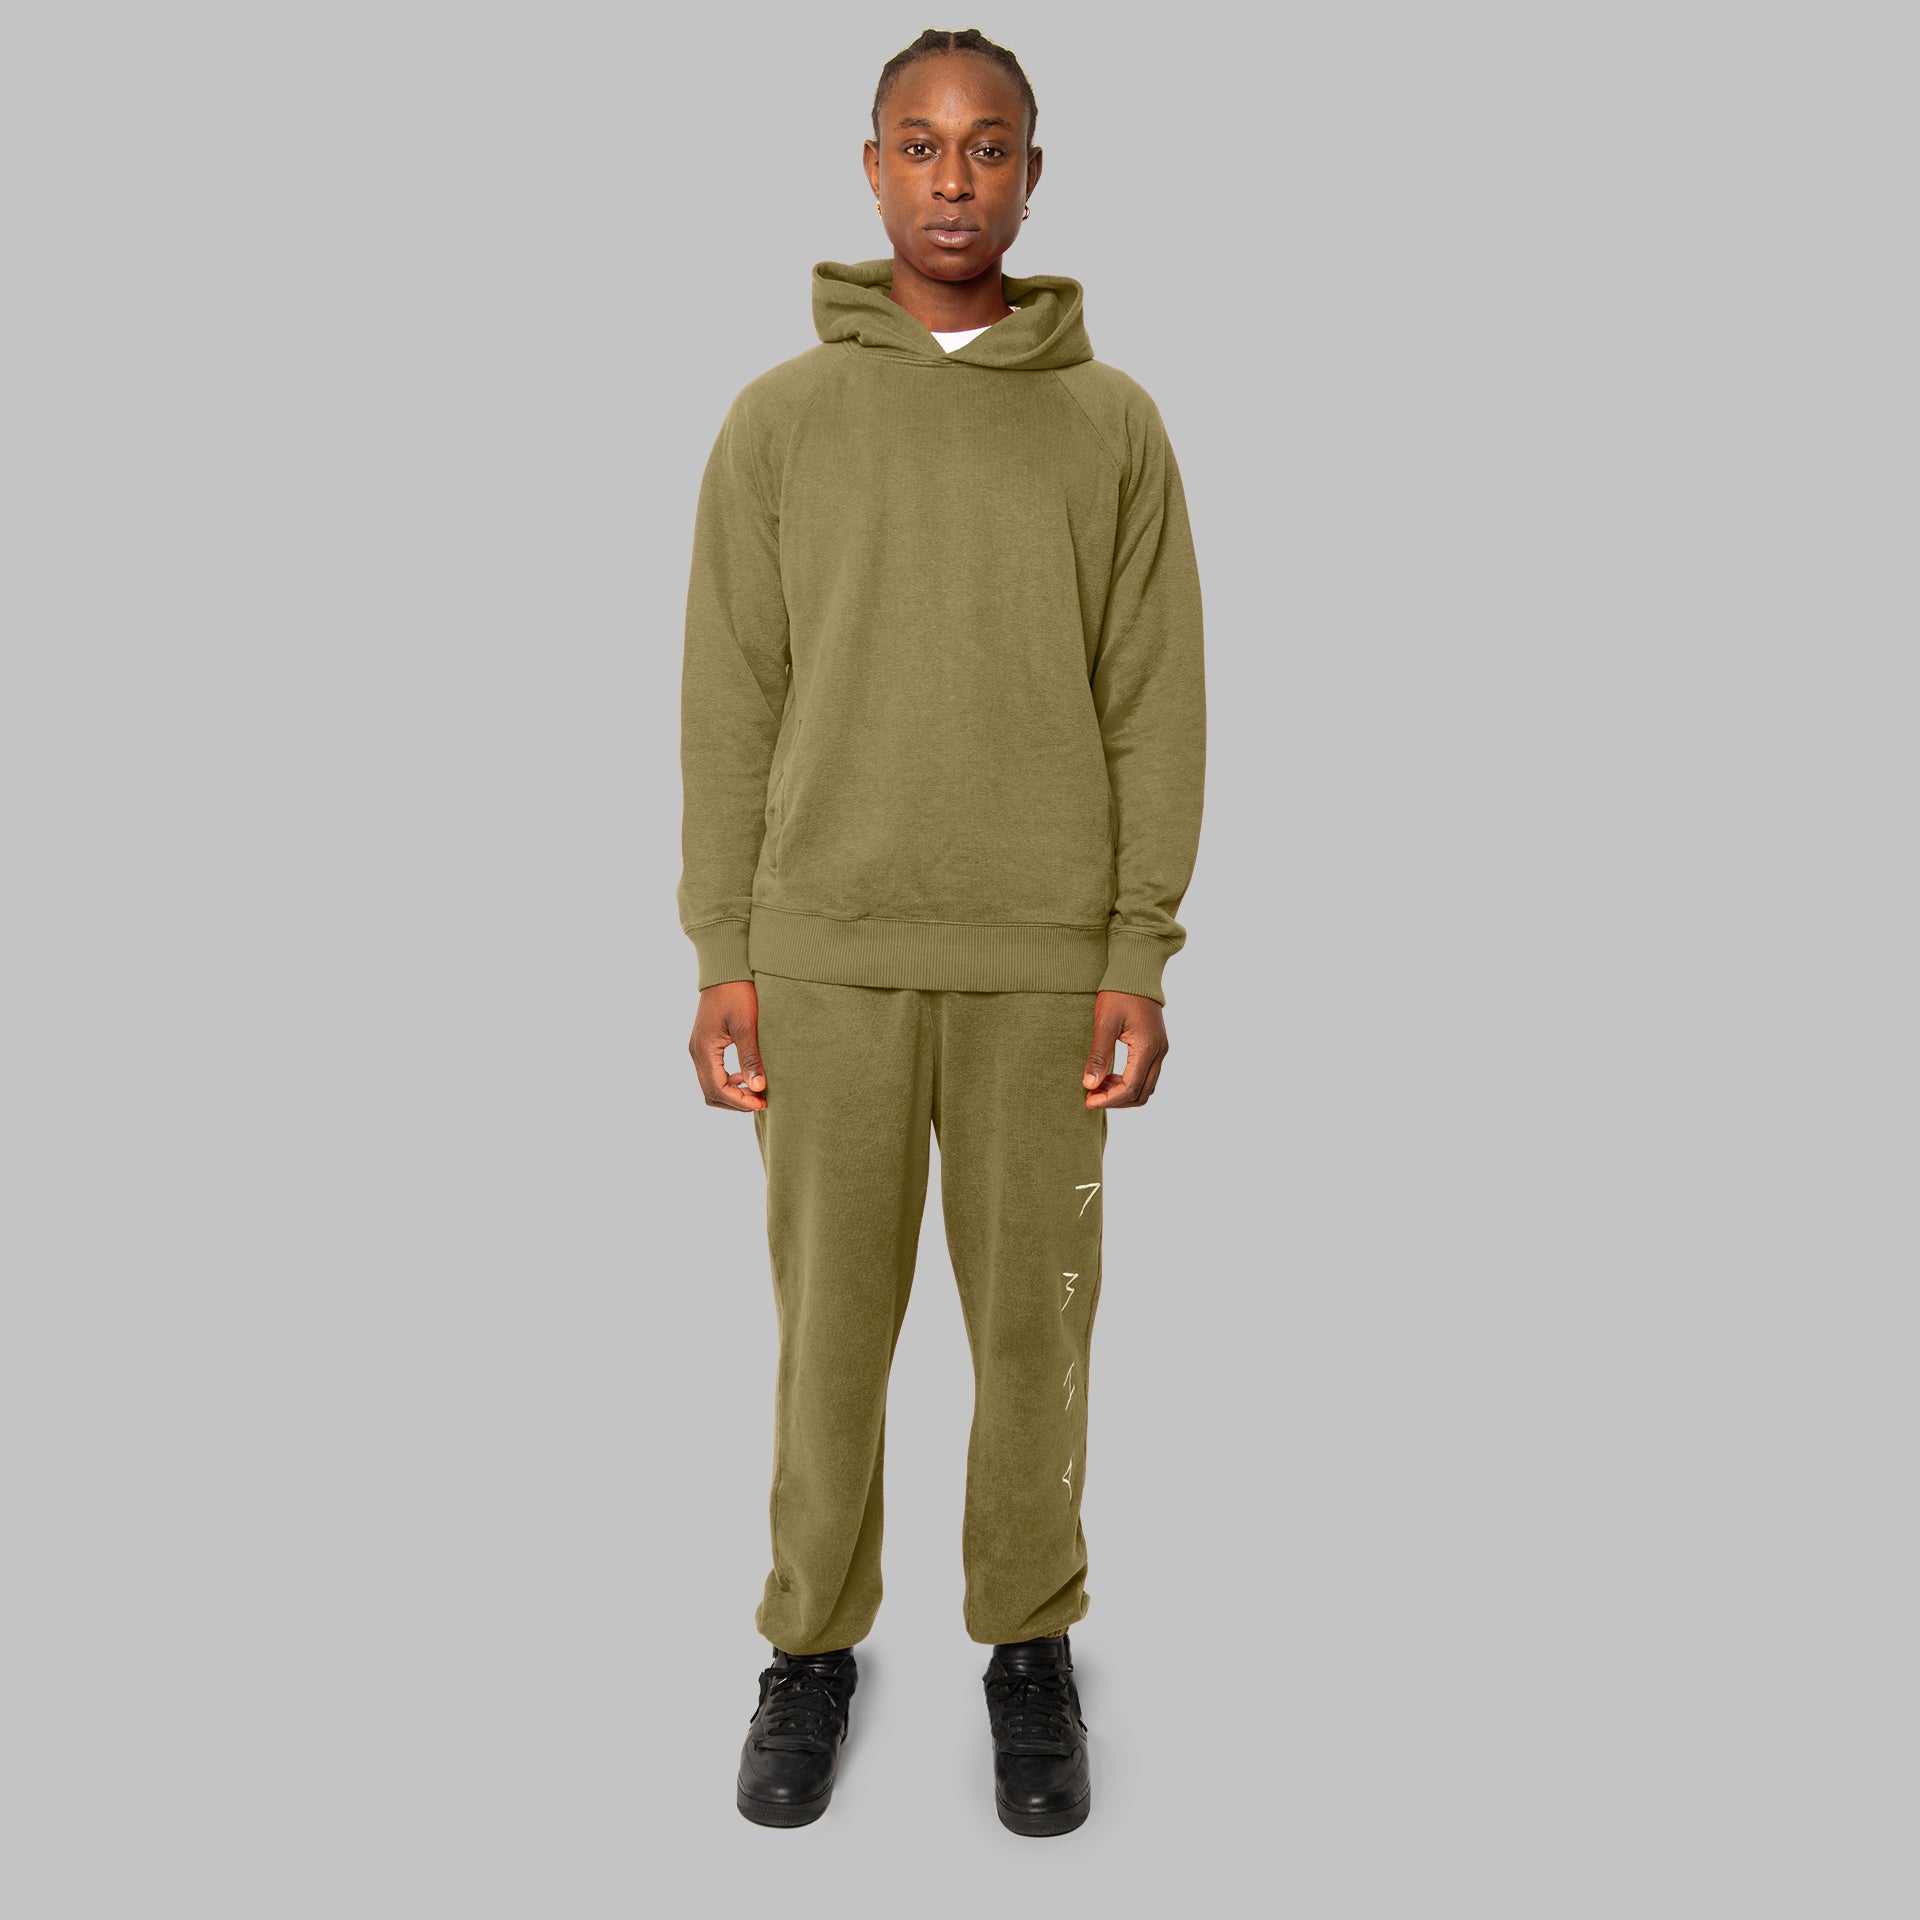 Full set olive hemp tracksuit. Olive hemp joggers and olive hemp hoodie. Front view of model. Sustainable street style. 